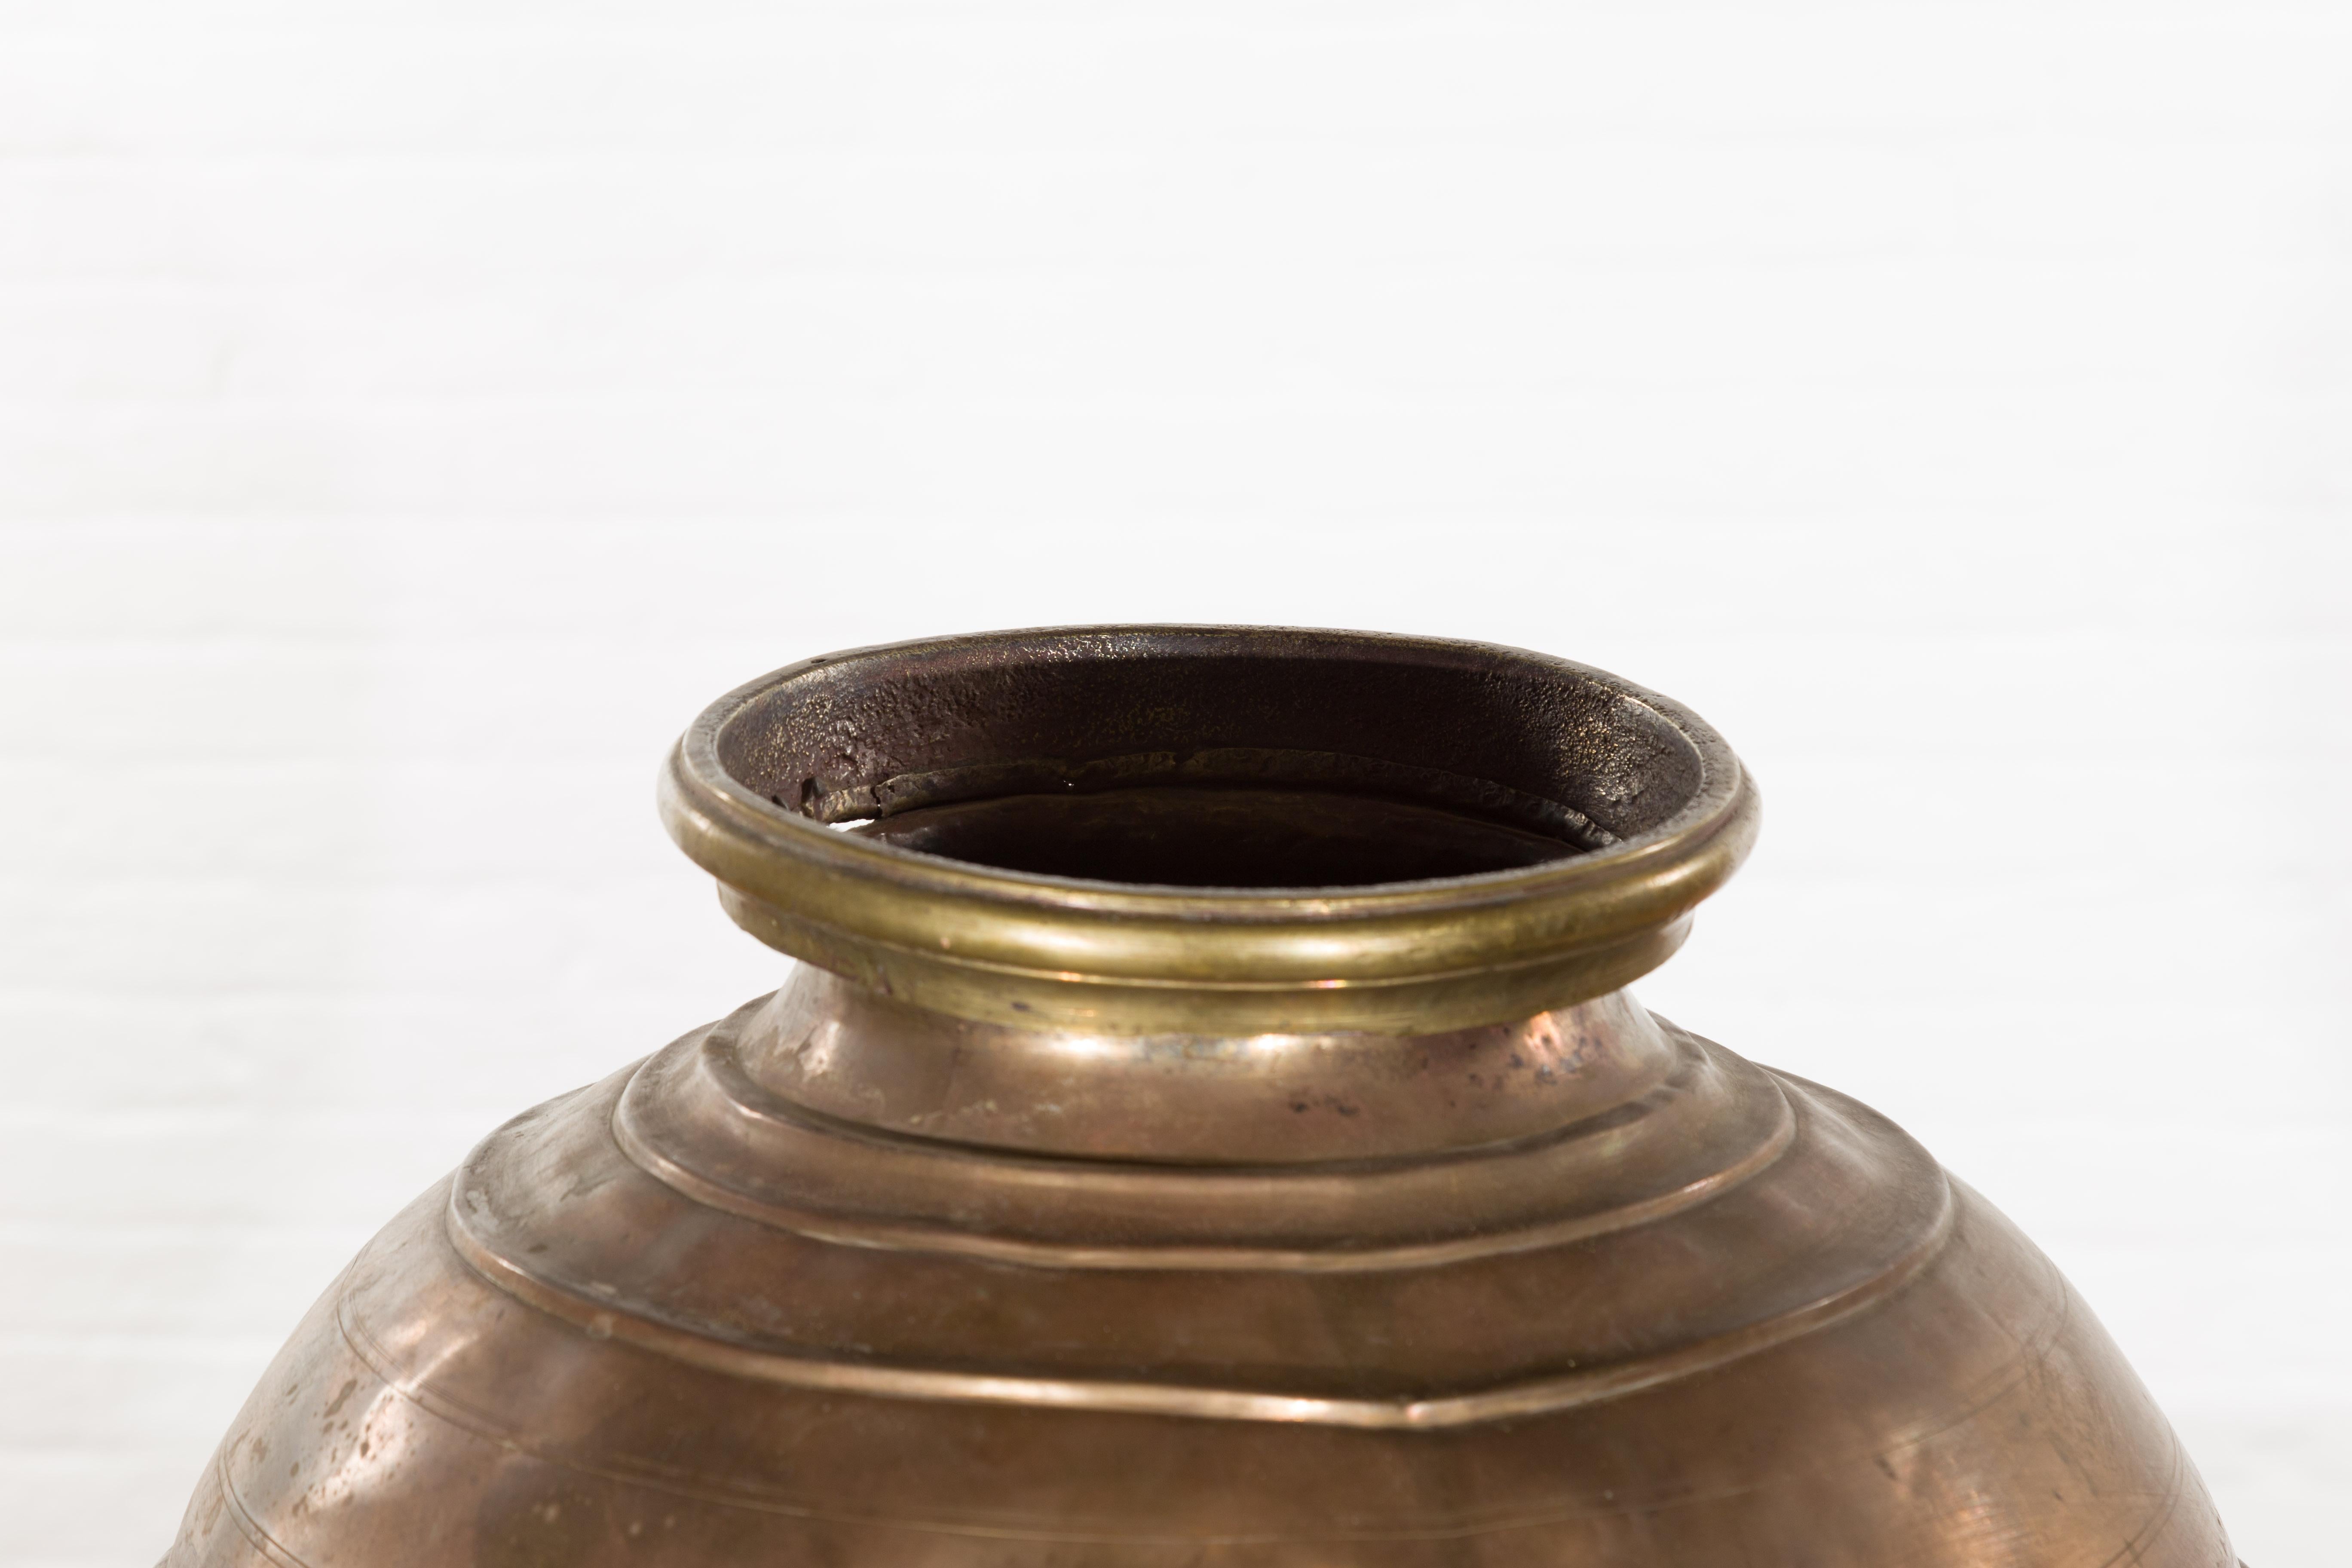 Indian Vintage Brass Water Jar with Concentric Rings and Distressed Appearance 4